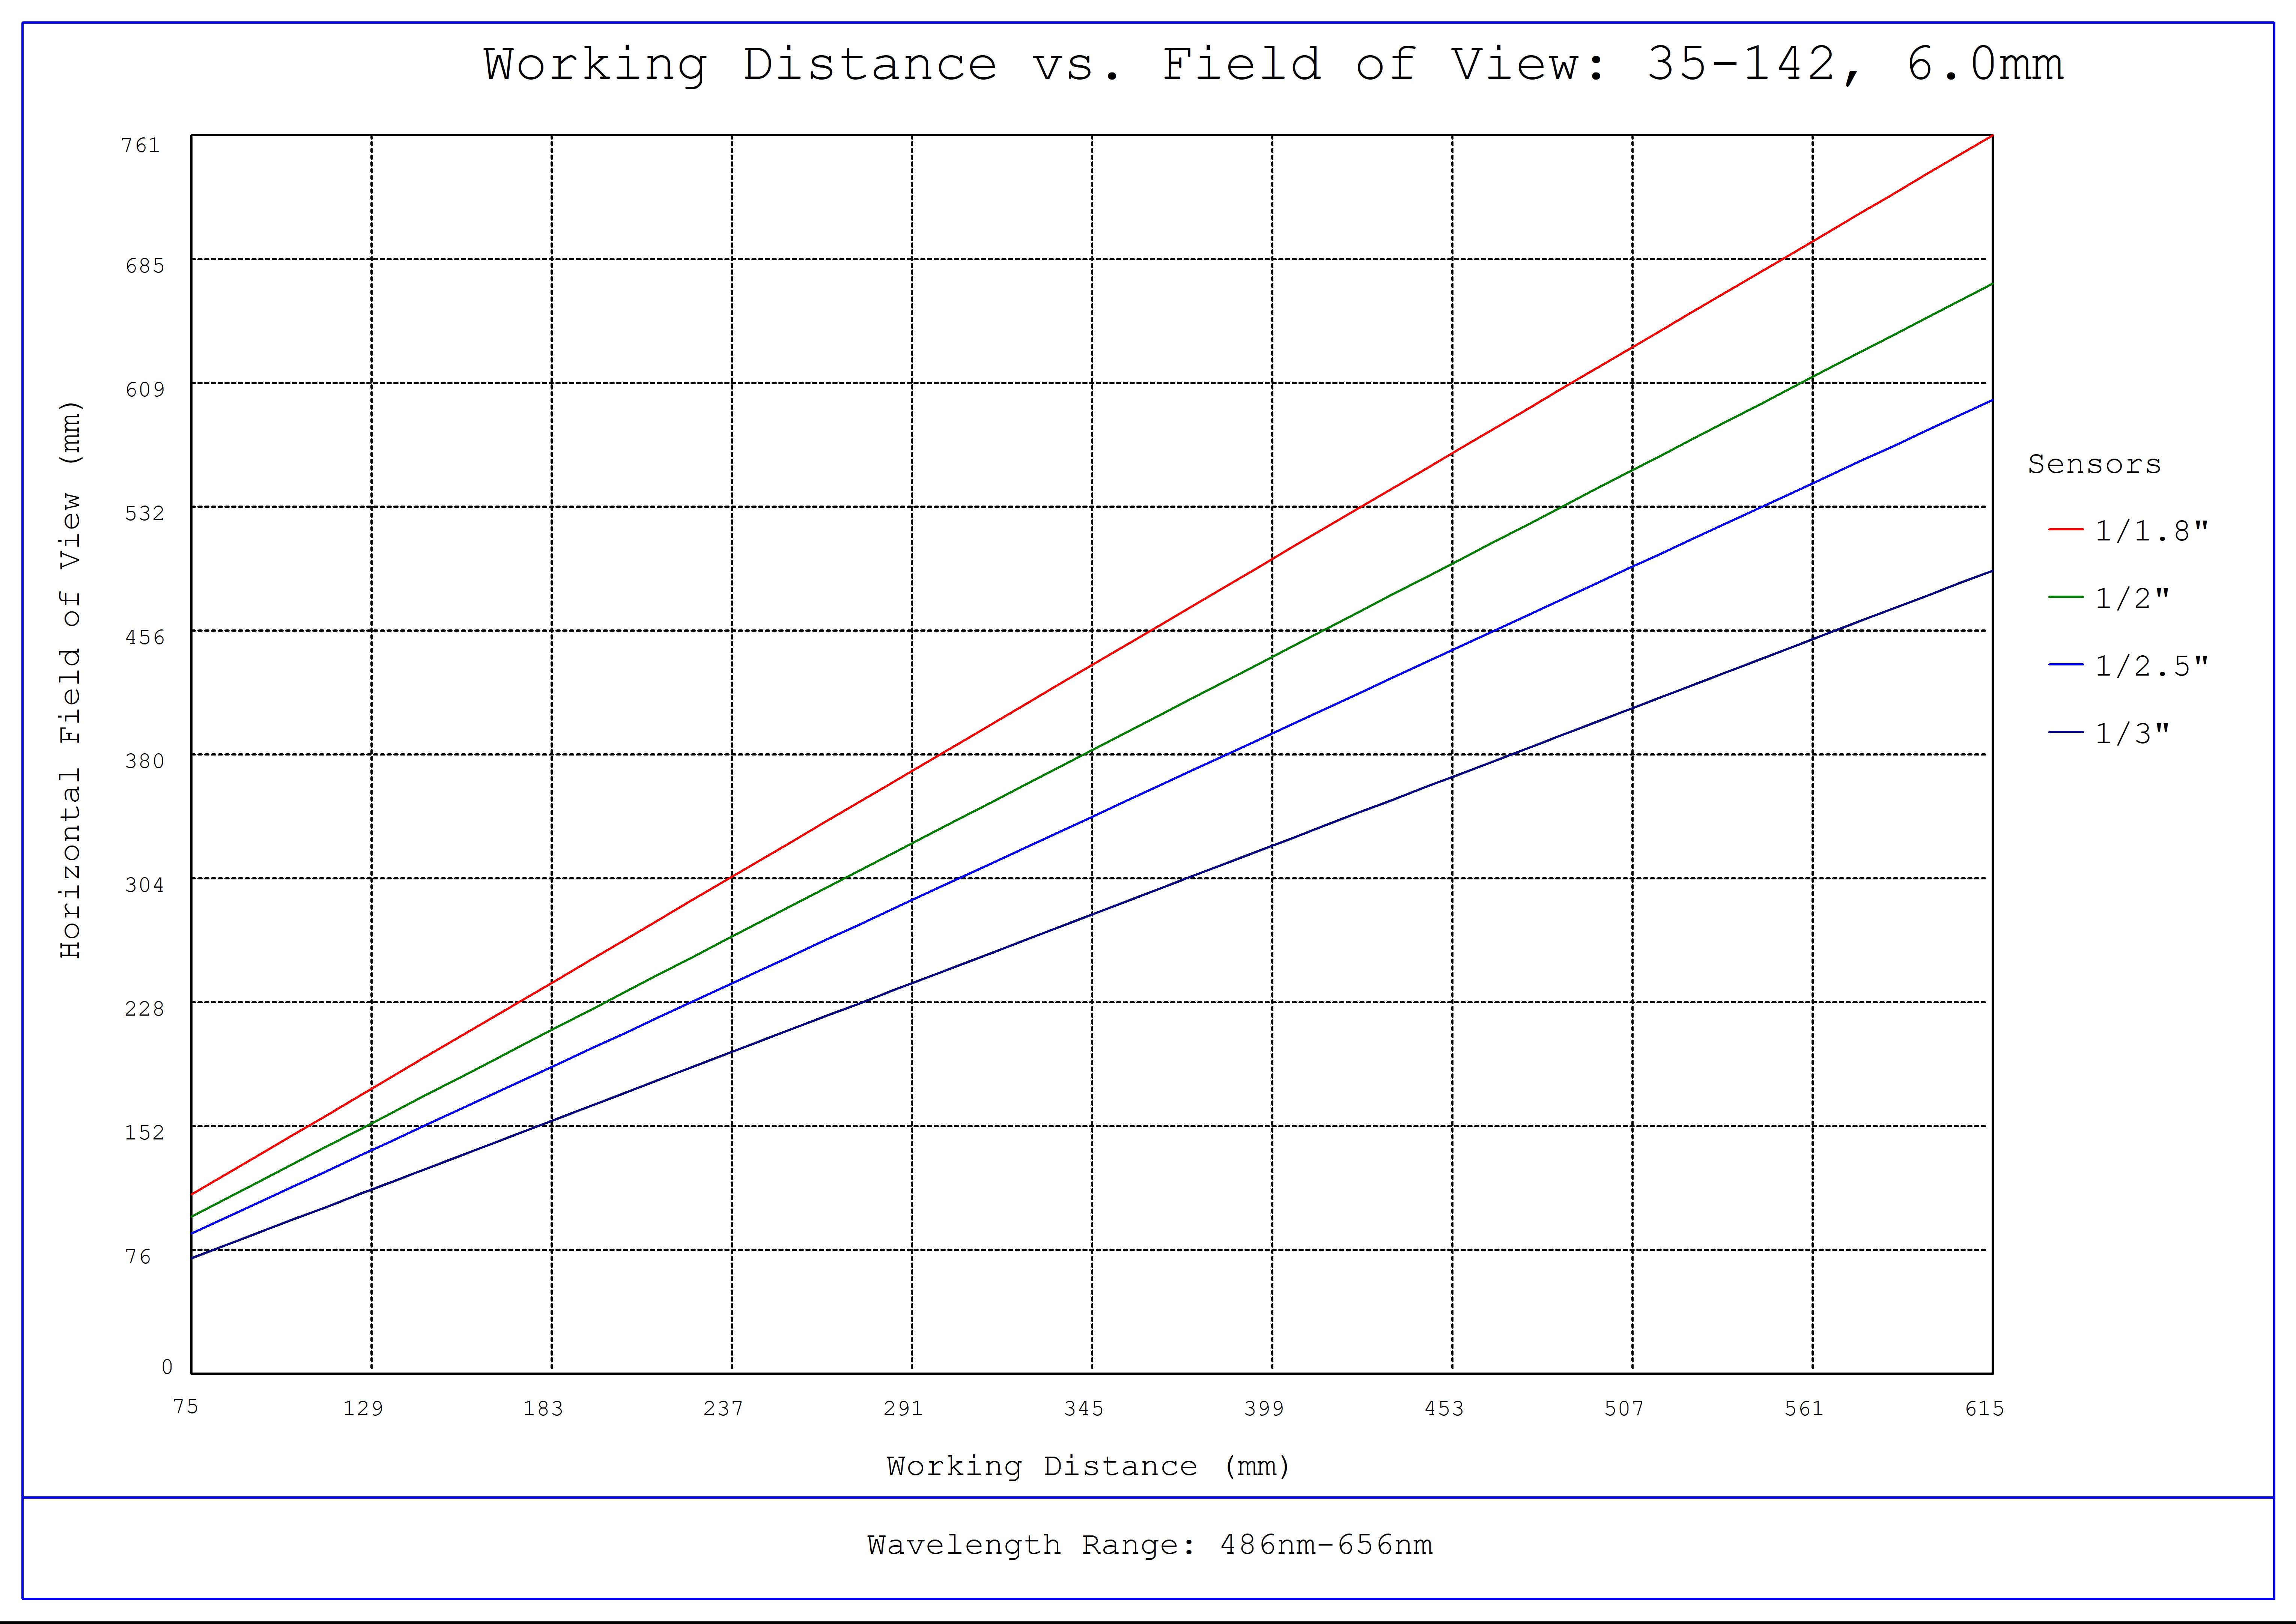 #35-142, 6mm, f/4 Cr Series Fixed Focal Length Lens, Working Distance versus Field of View Plot